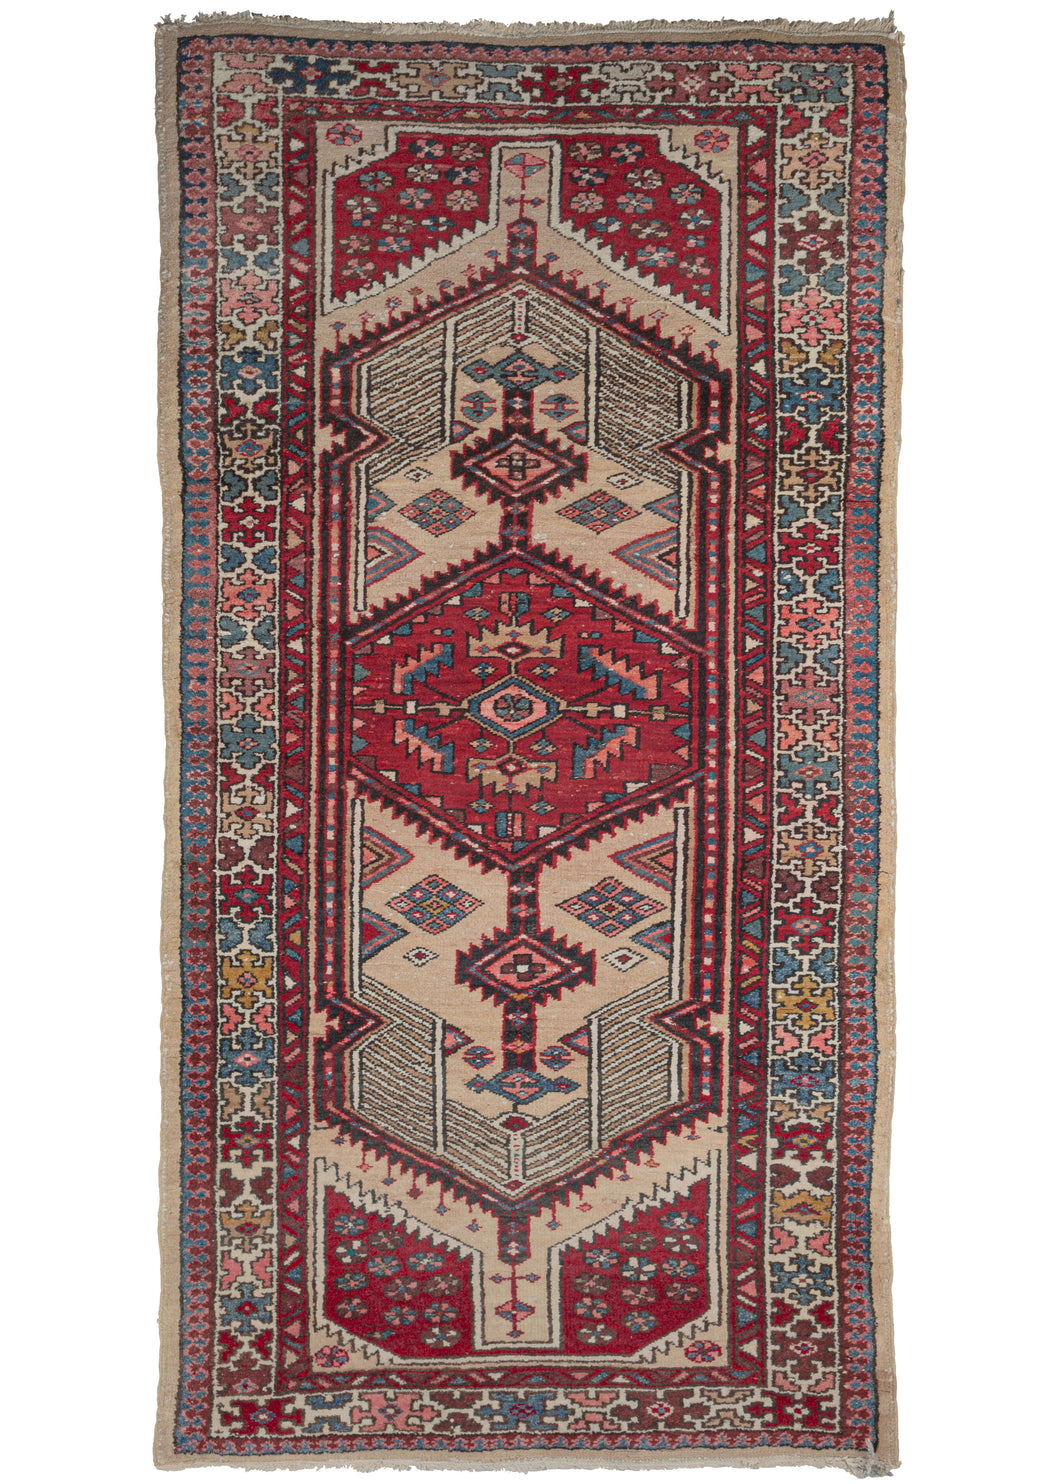 This Vintage Serab Rug features a sandy camel ground which lends the soft backdrop for saturated blues, reds, pinks, and yellows. The ivory in both the latticework and ground of the main border work to brighten the whole.